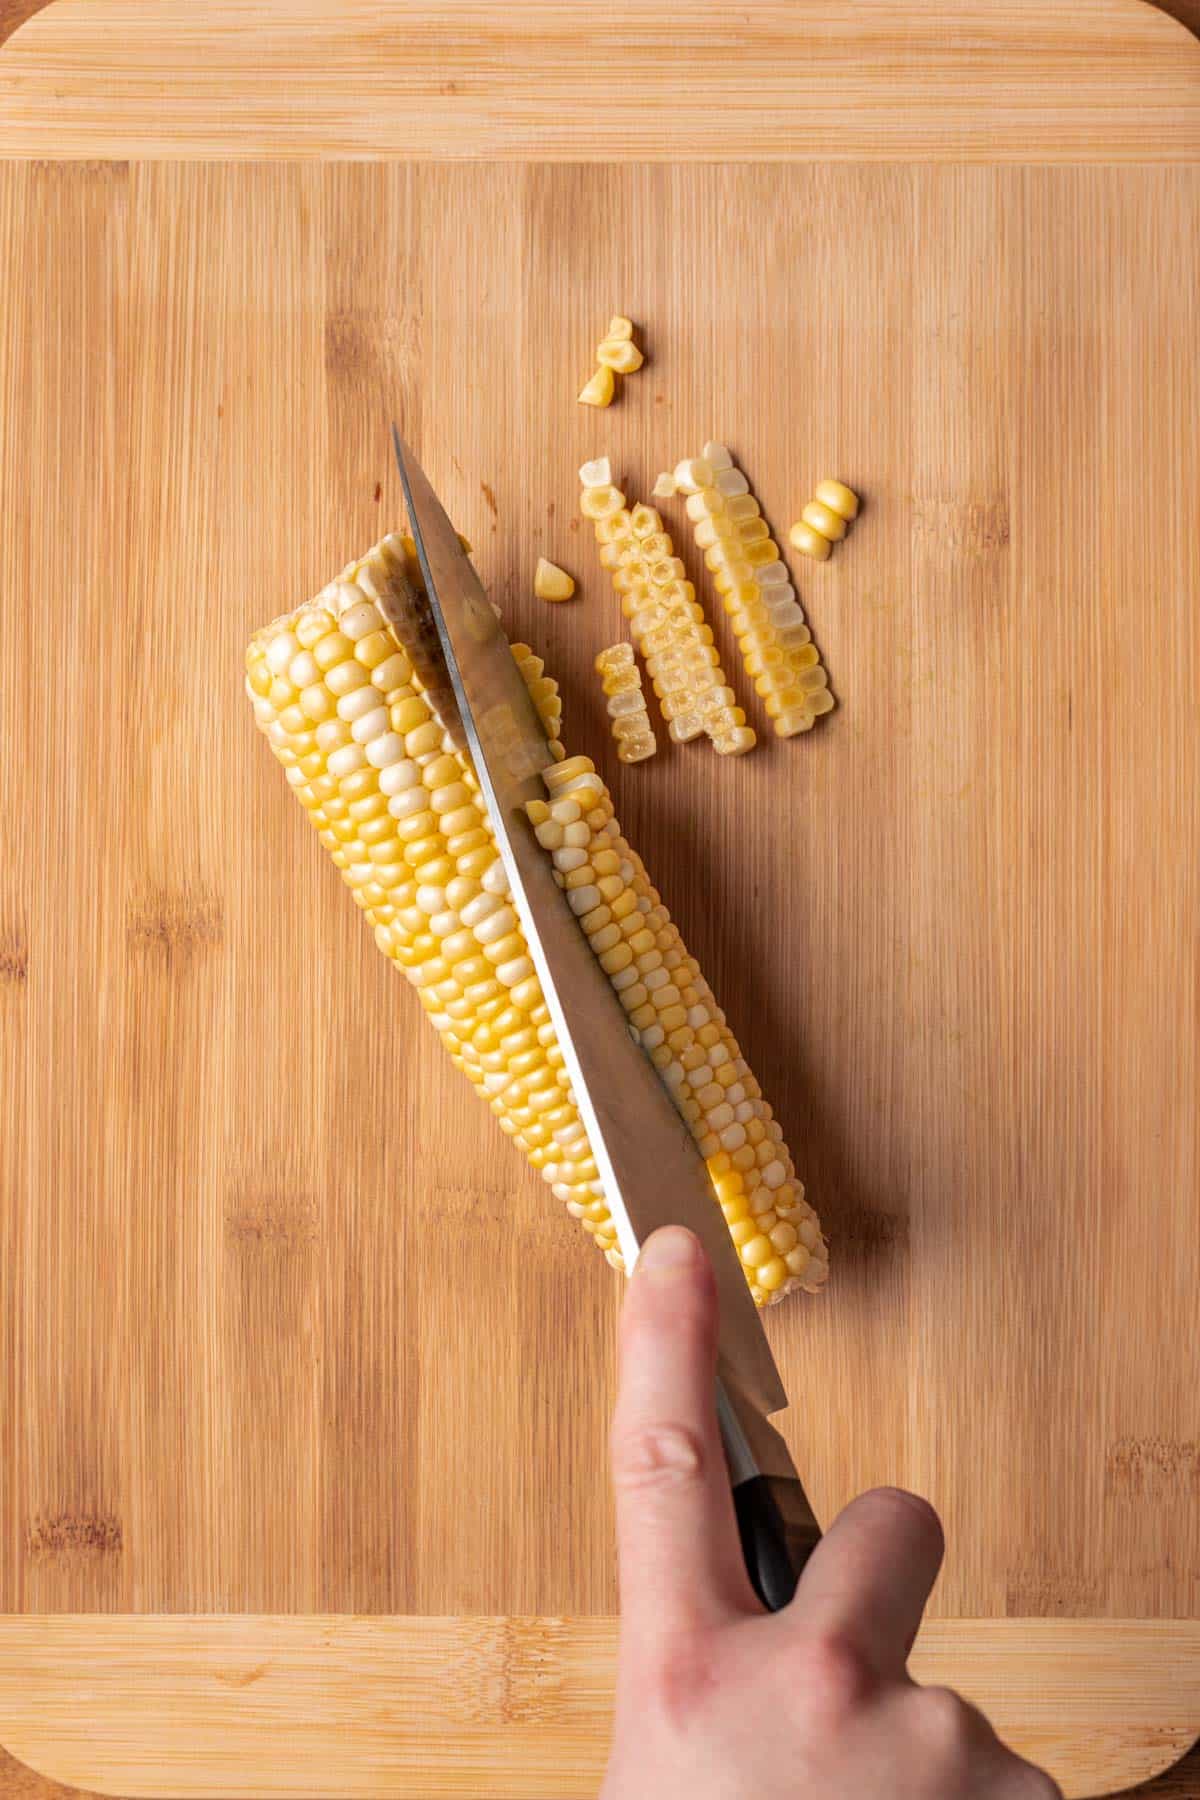 A chef's knife cutting corn off the side of the cob.